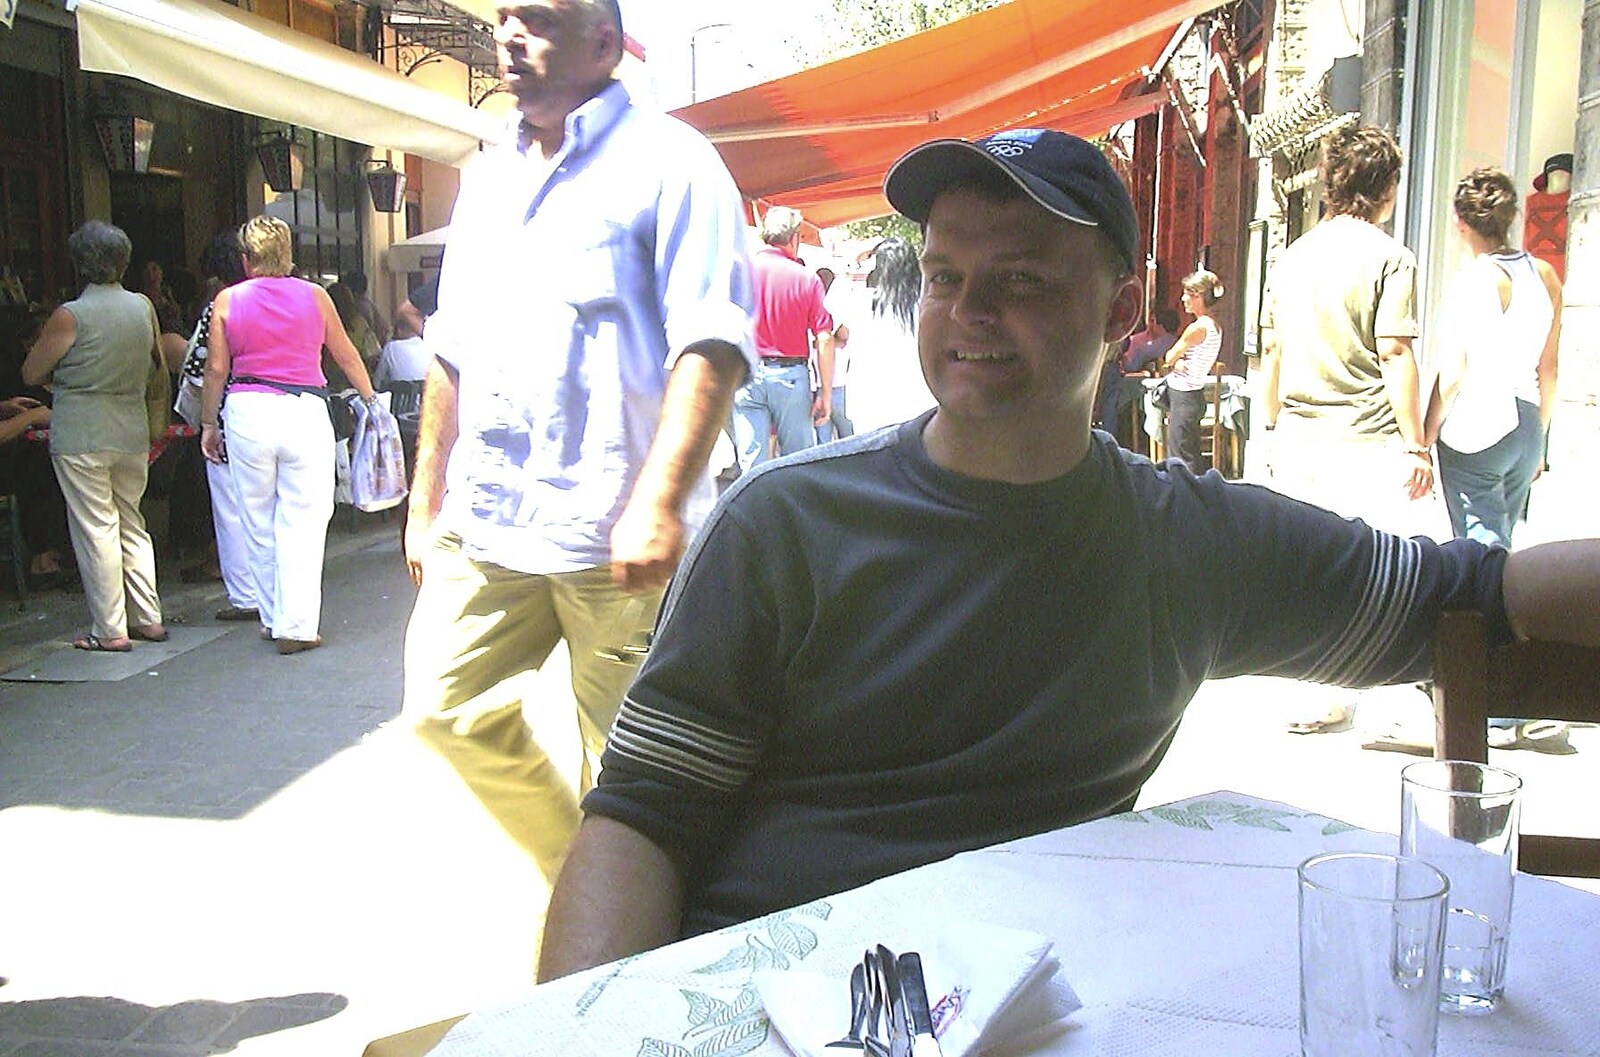 A Postcard From Athens: A Day Trip to the Olympics, Greece - 19th August 2004: Nosher meets up with Nick again